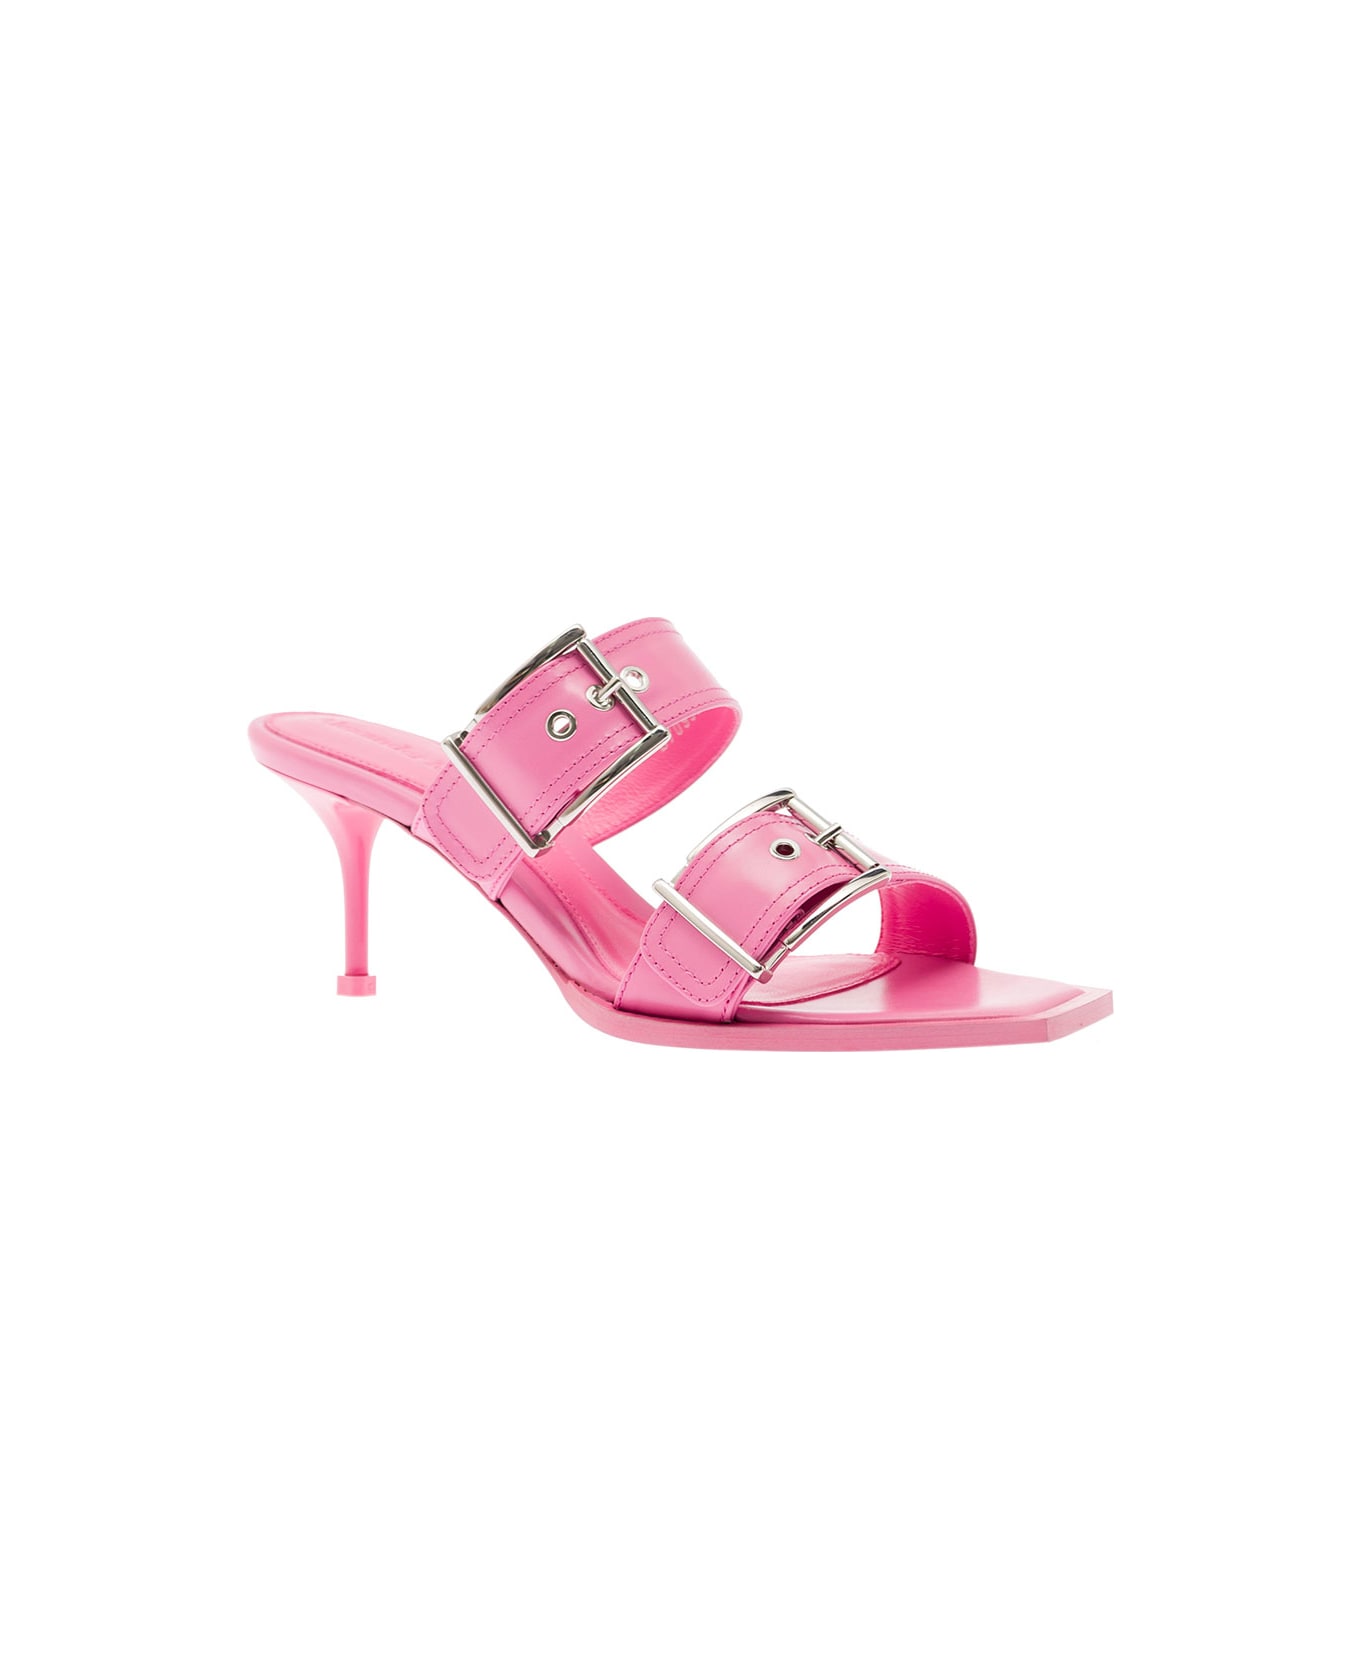 Alexander McQueen 'punk' Pink Sandals With Double Strap And Metal Buckles In Leather Woman - Pink サンダル